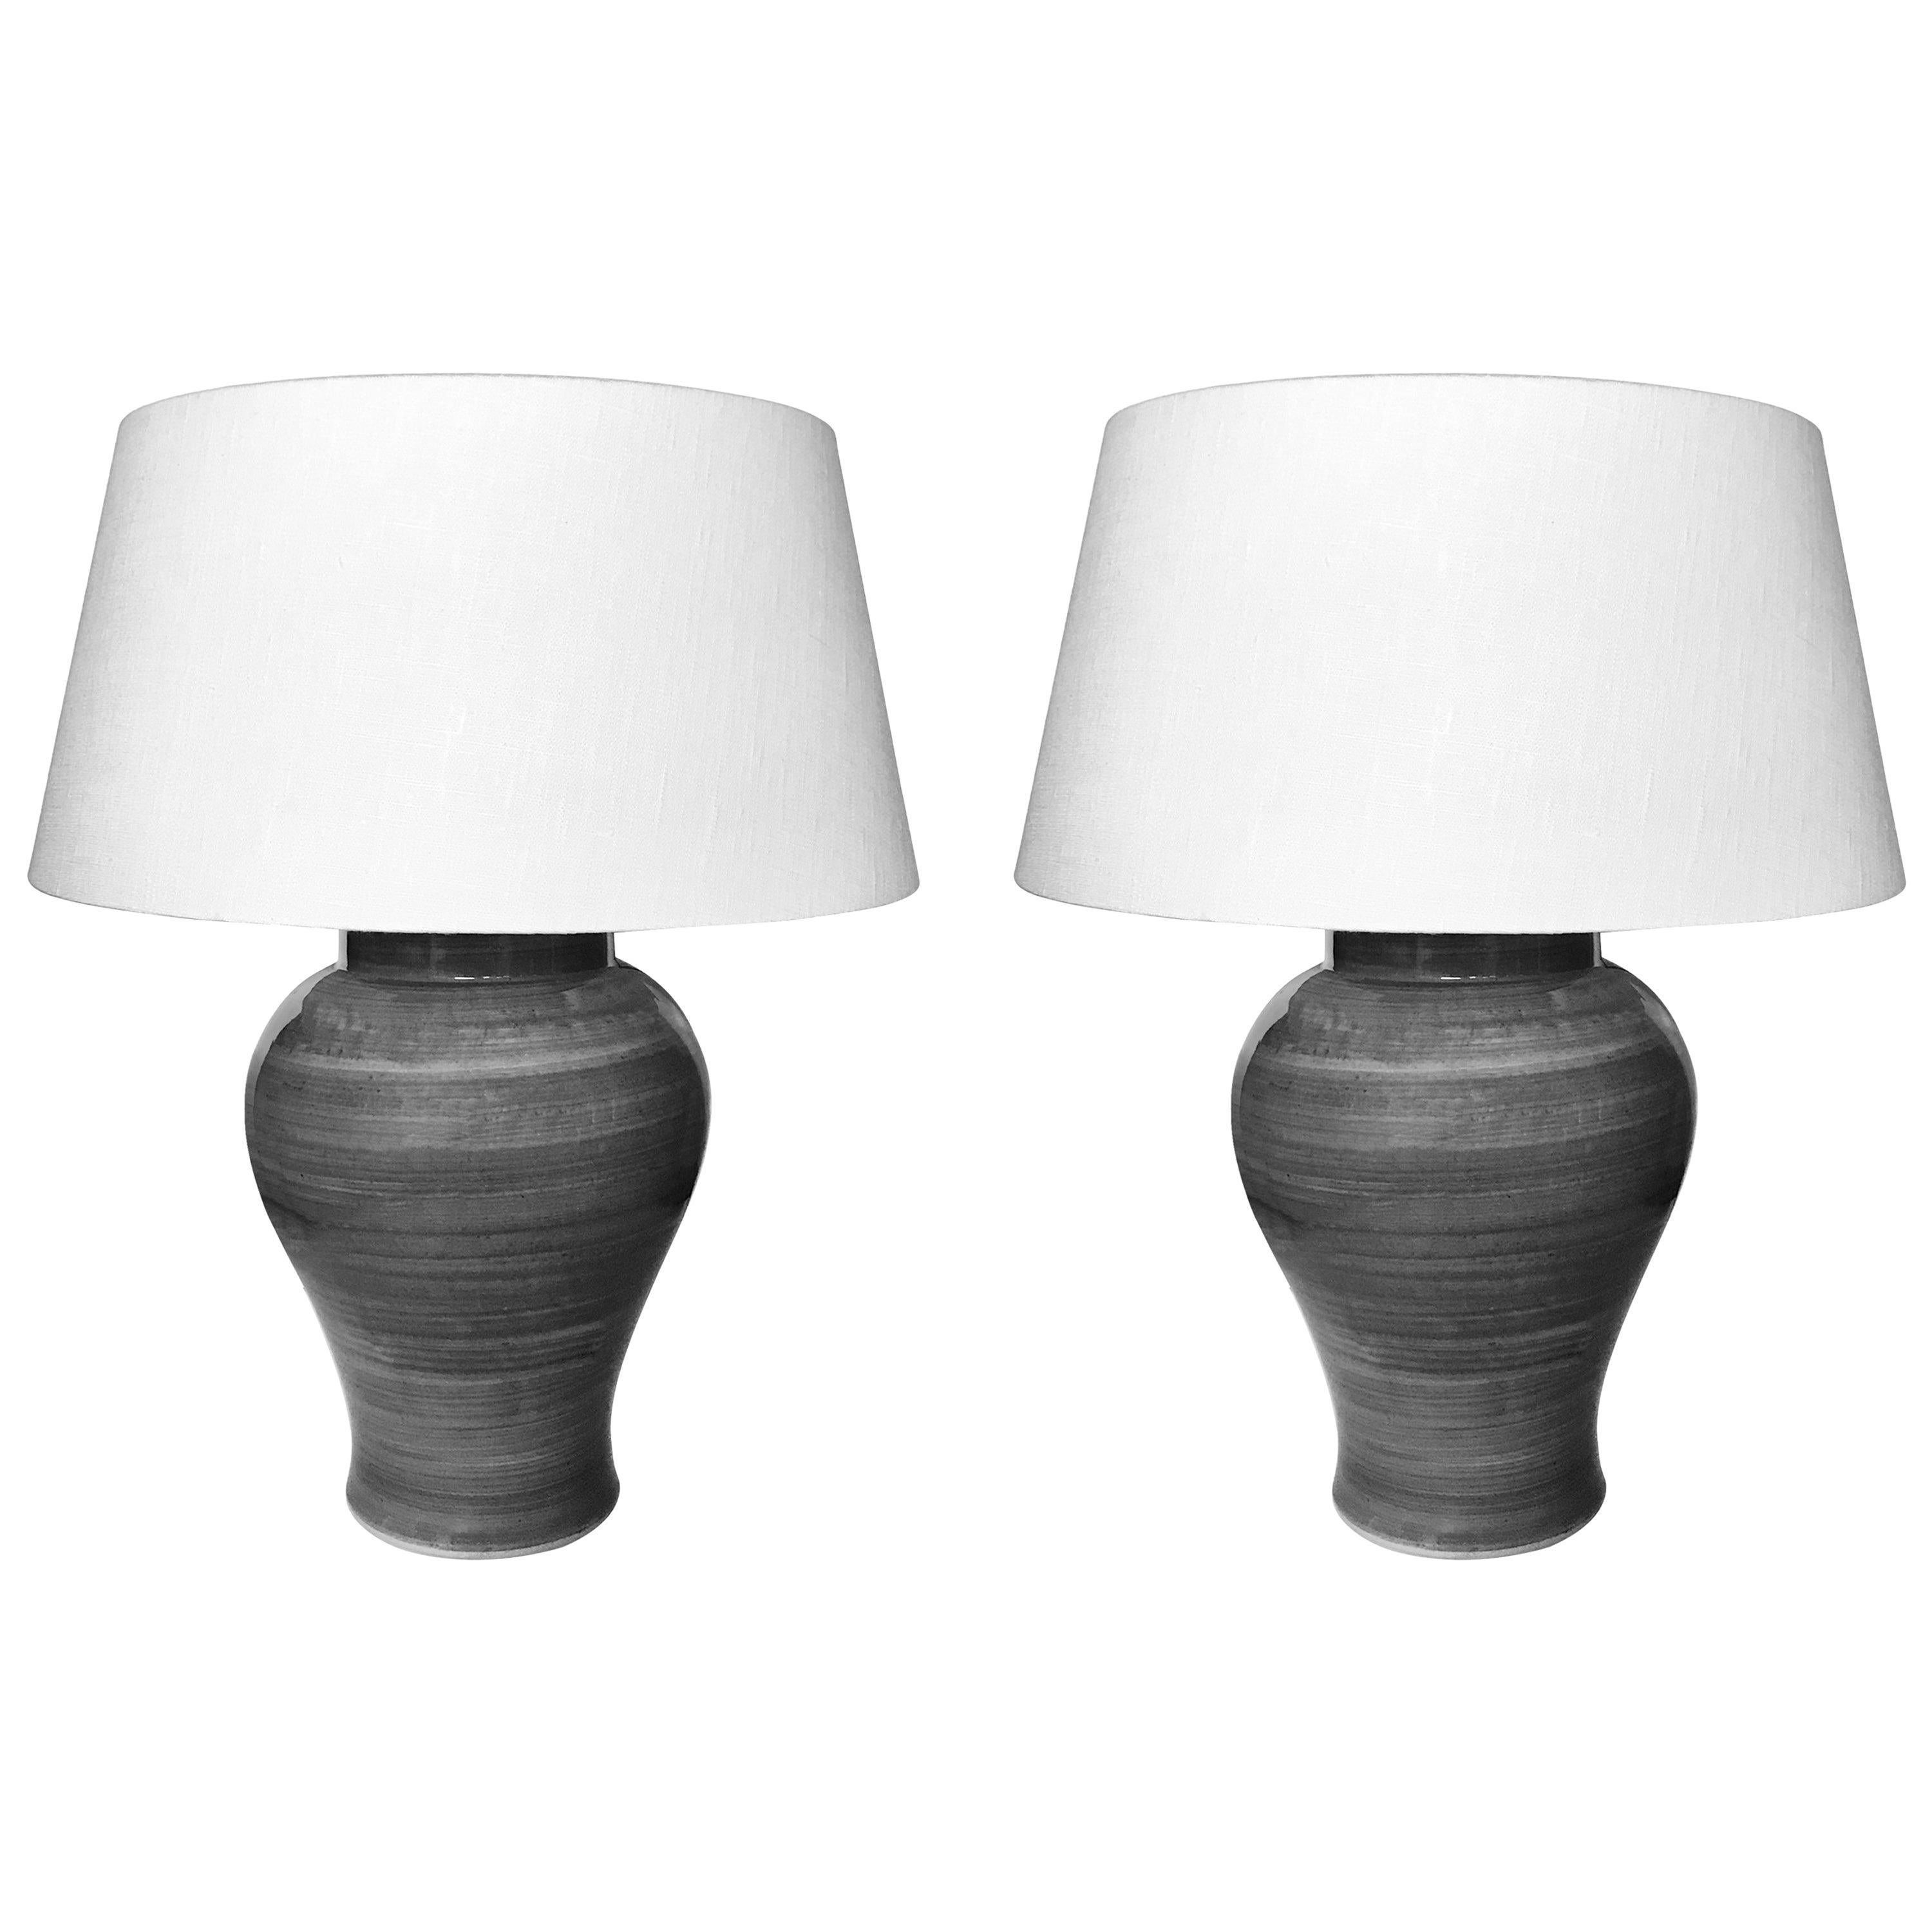 Gray Striated Design Classic Shape Pair of Lamps, China, Contemporary